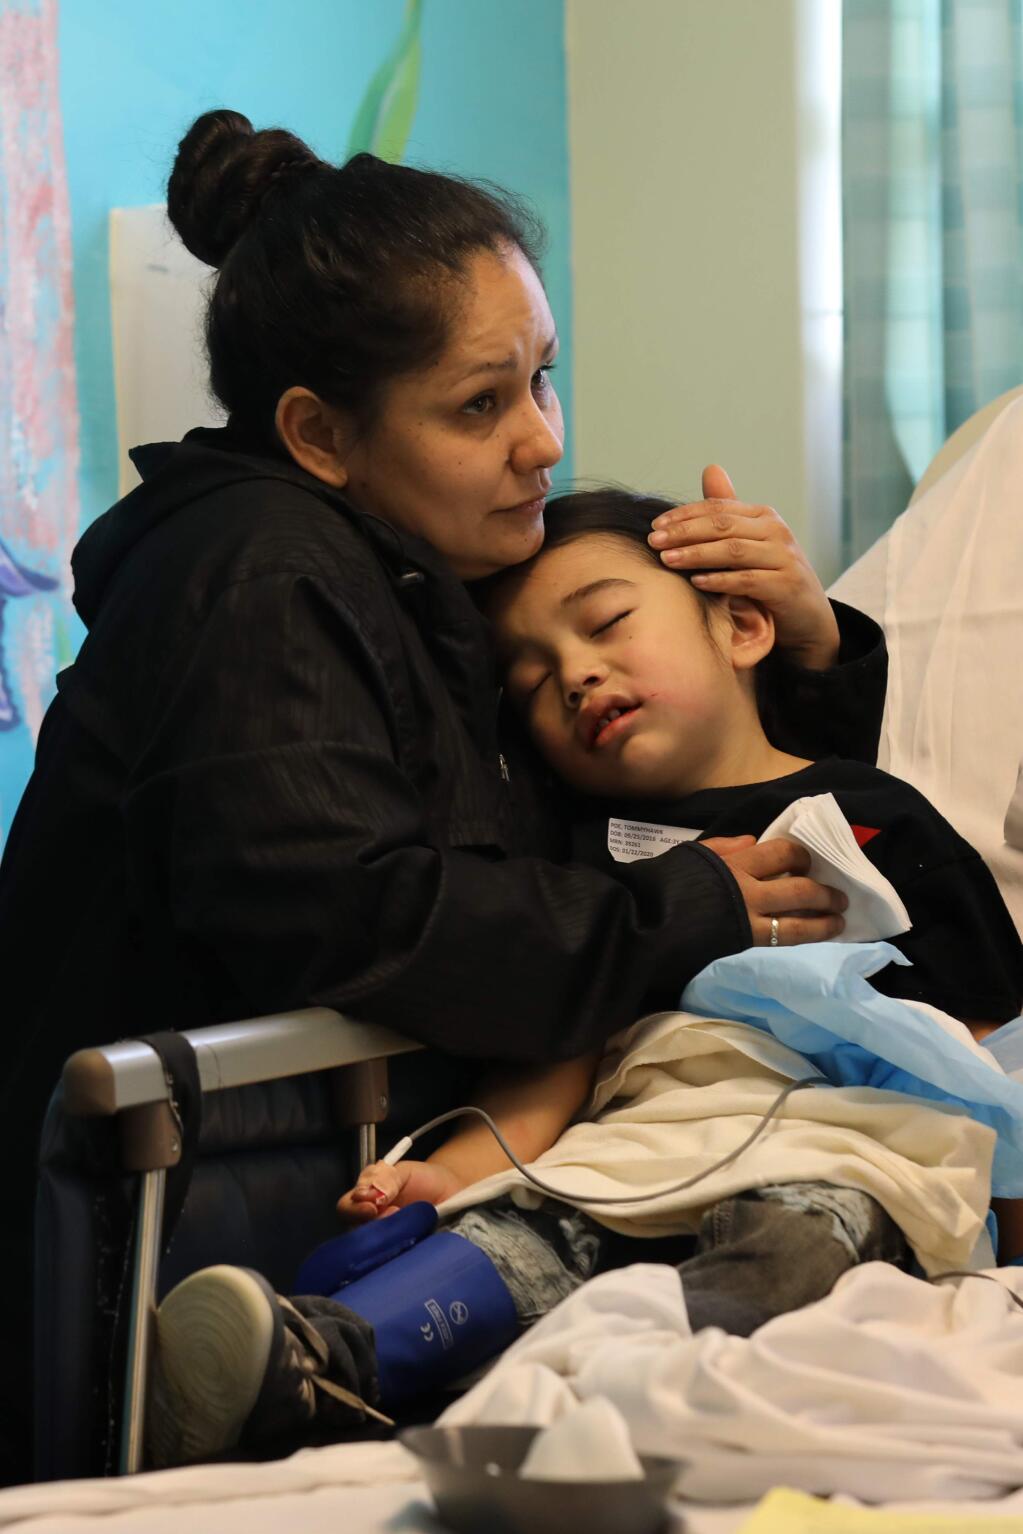 Nicole Ventura comforts her son TommyHawk Poe, 3, while he wakes up after having multiple crowns and tooth extractions at the PDI Surgery Center in Windsor on Wednesday, January 22, 2020. (BETH SCHLANKER/ The Press Democrat)